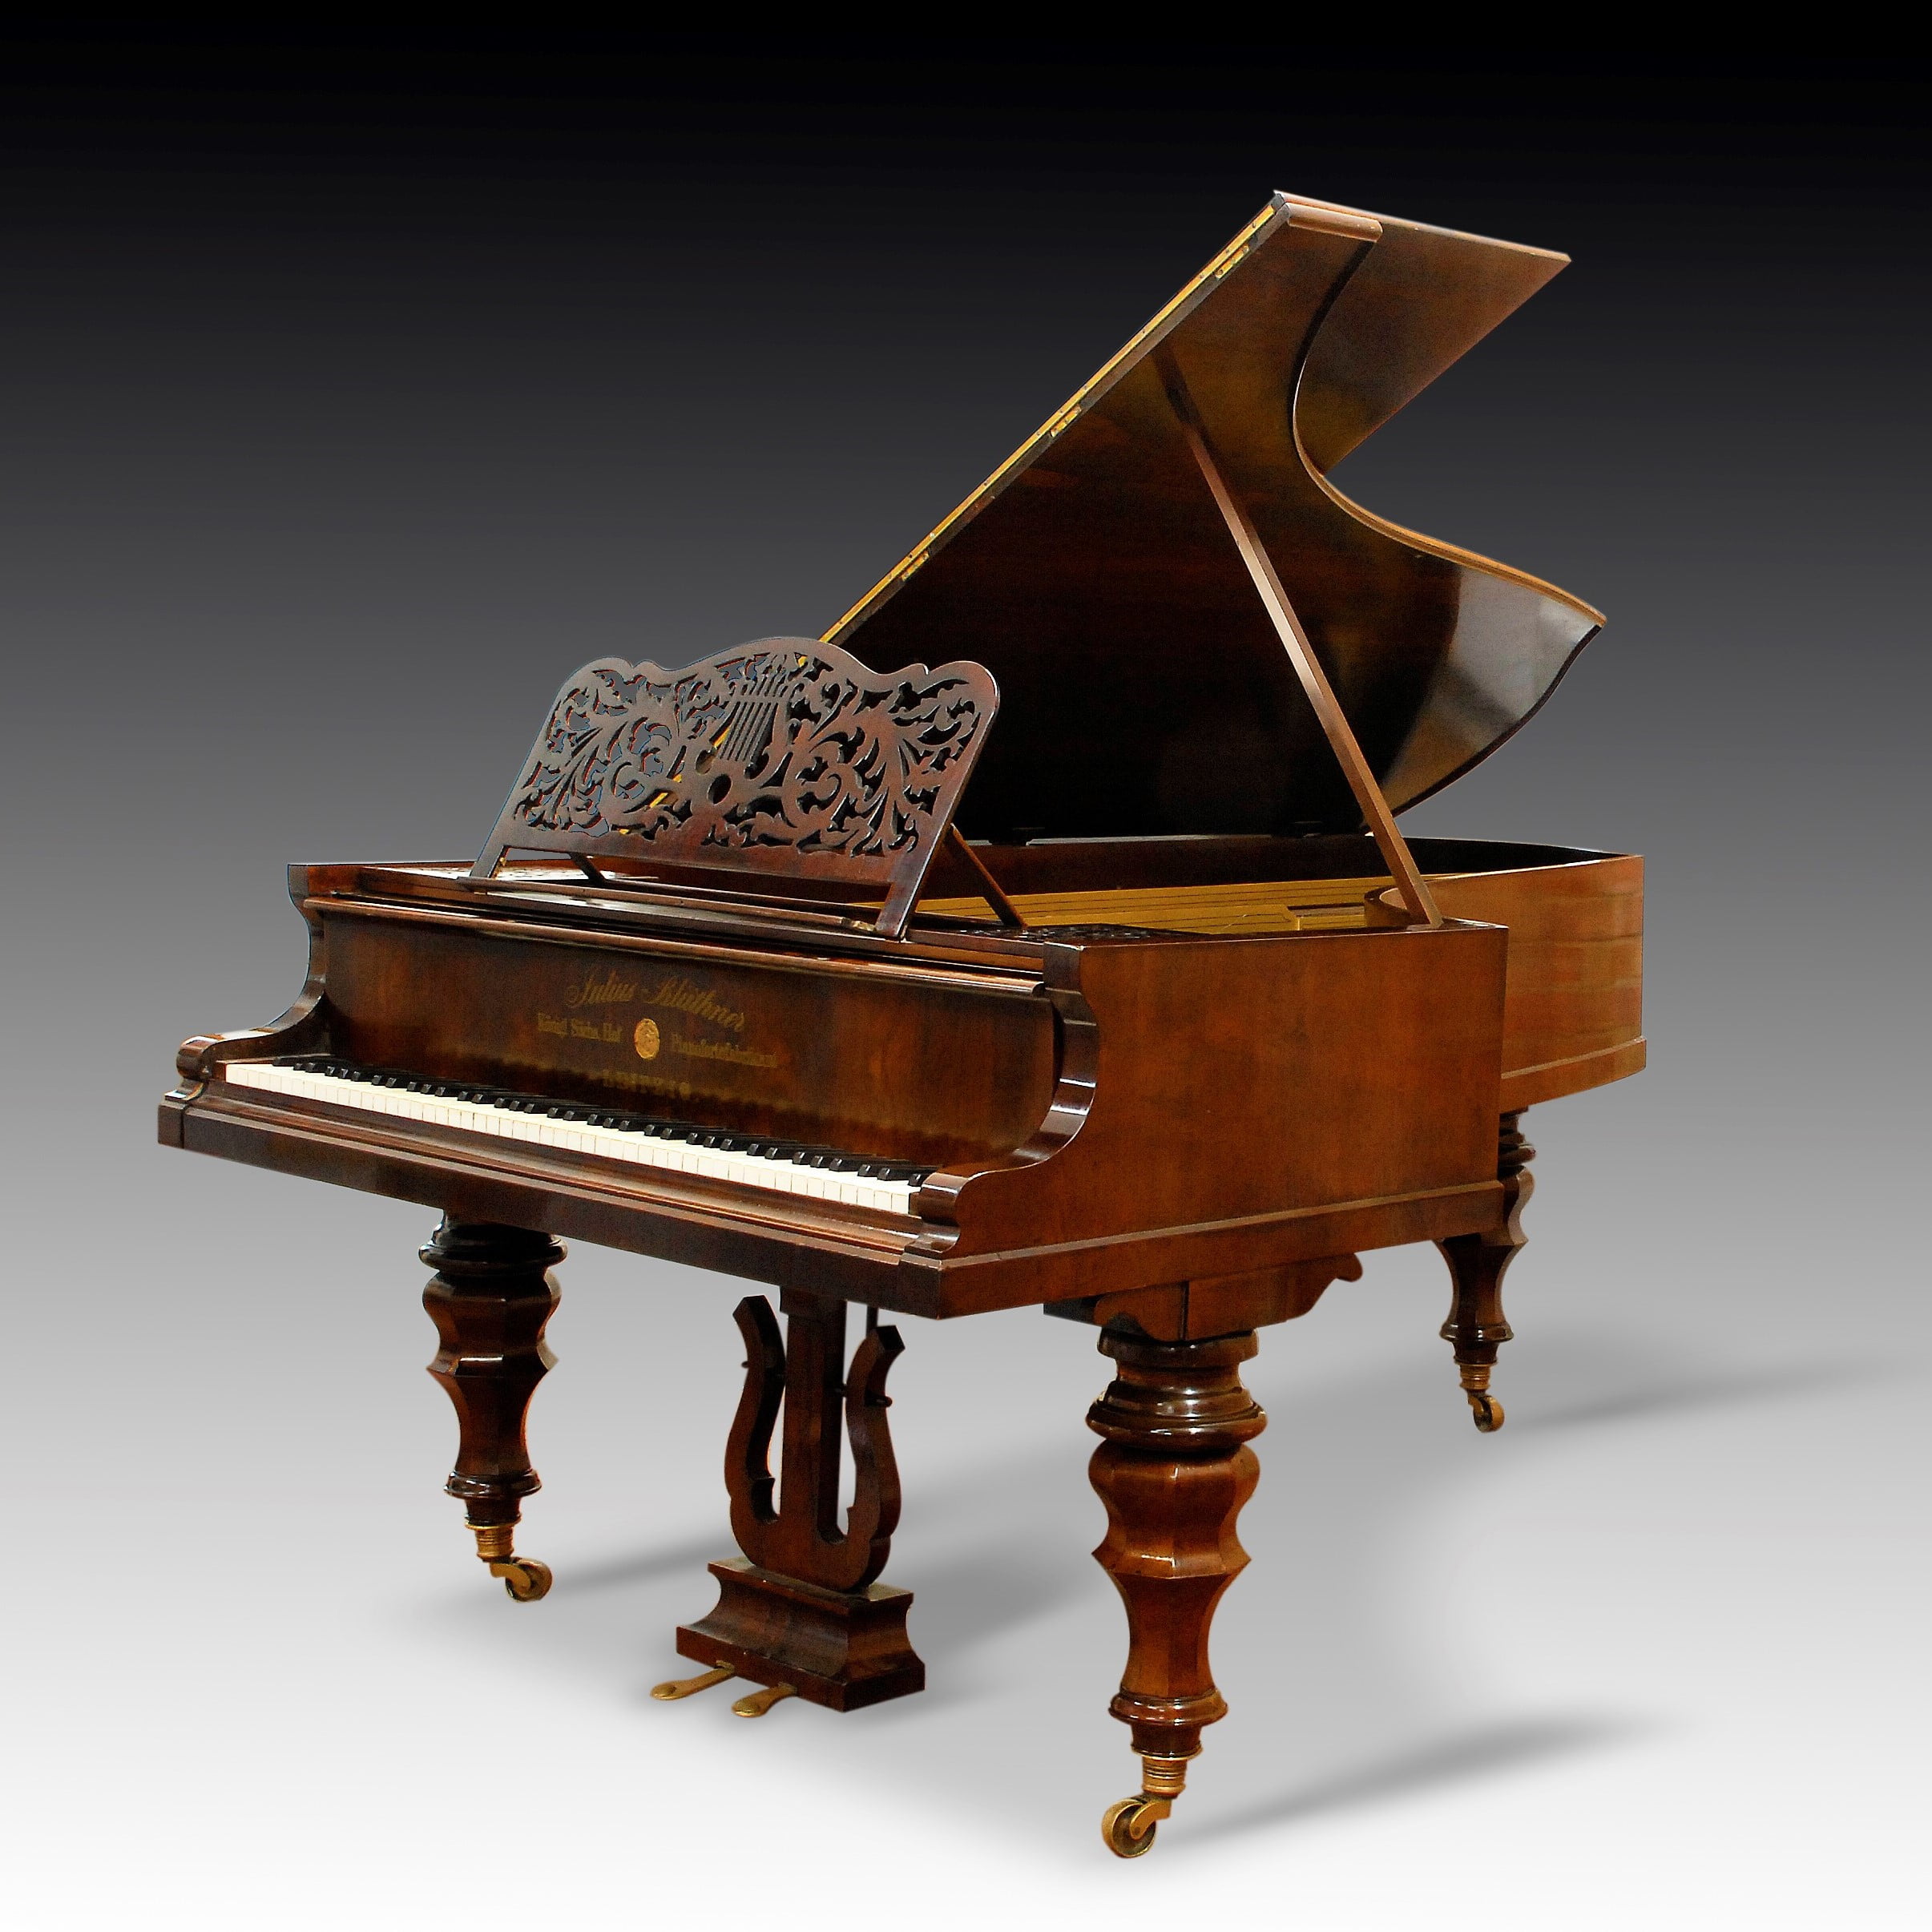 Bluthner 1854 Paderewski via Dreweatts Auctioneers for use by 360 Magazine